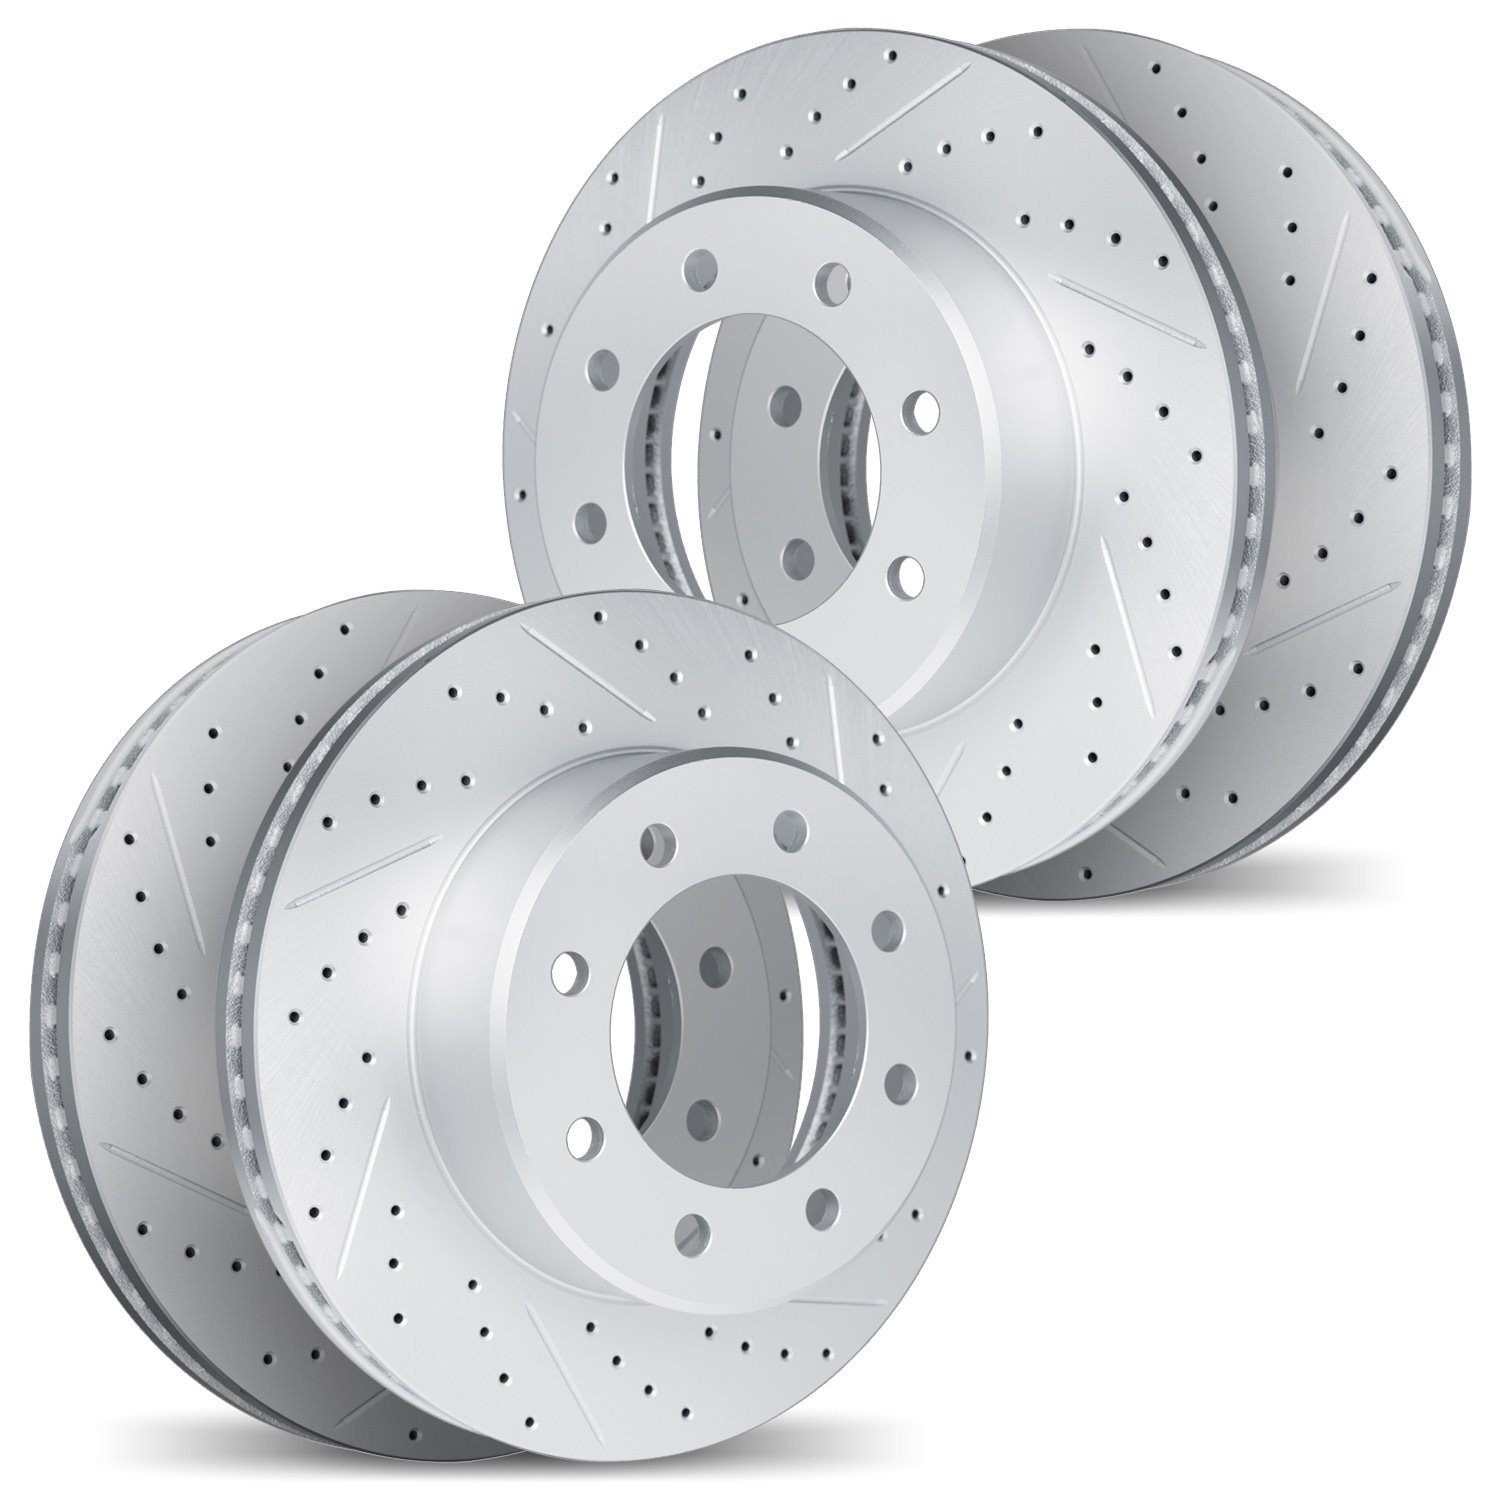 2004-54023 Geoperformance Drilled/Slotted Brake Rotors, 1999-2000 Ford/Lincoln/Mercury/Mazda, Position: Front and Rear